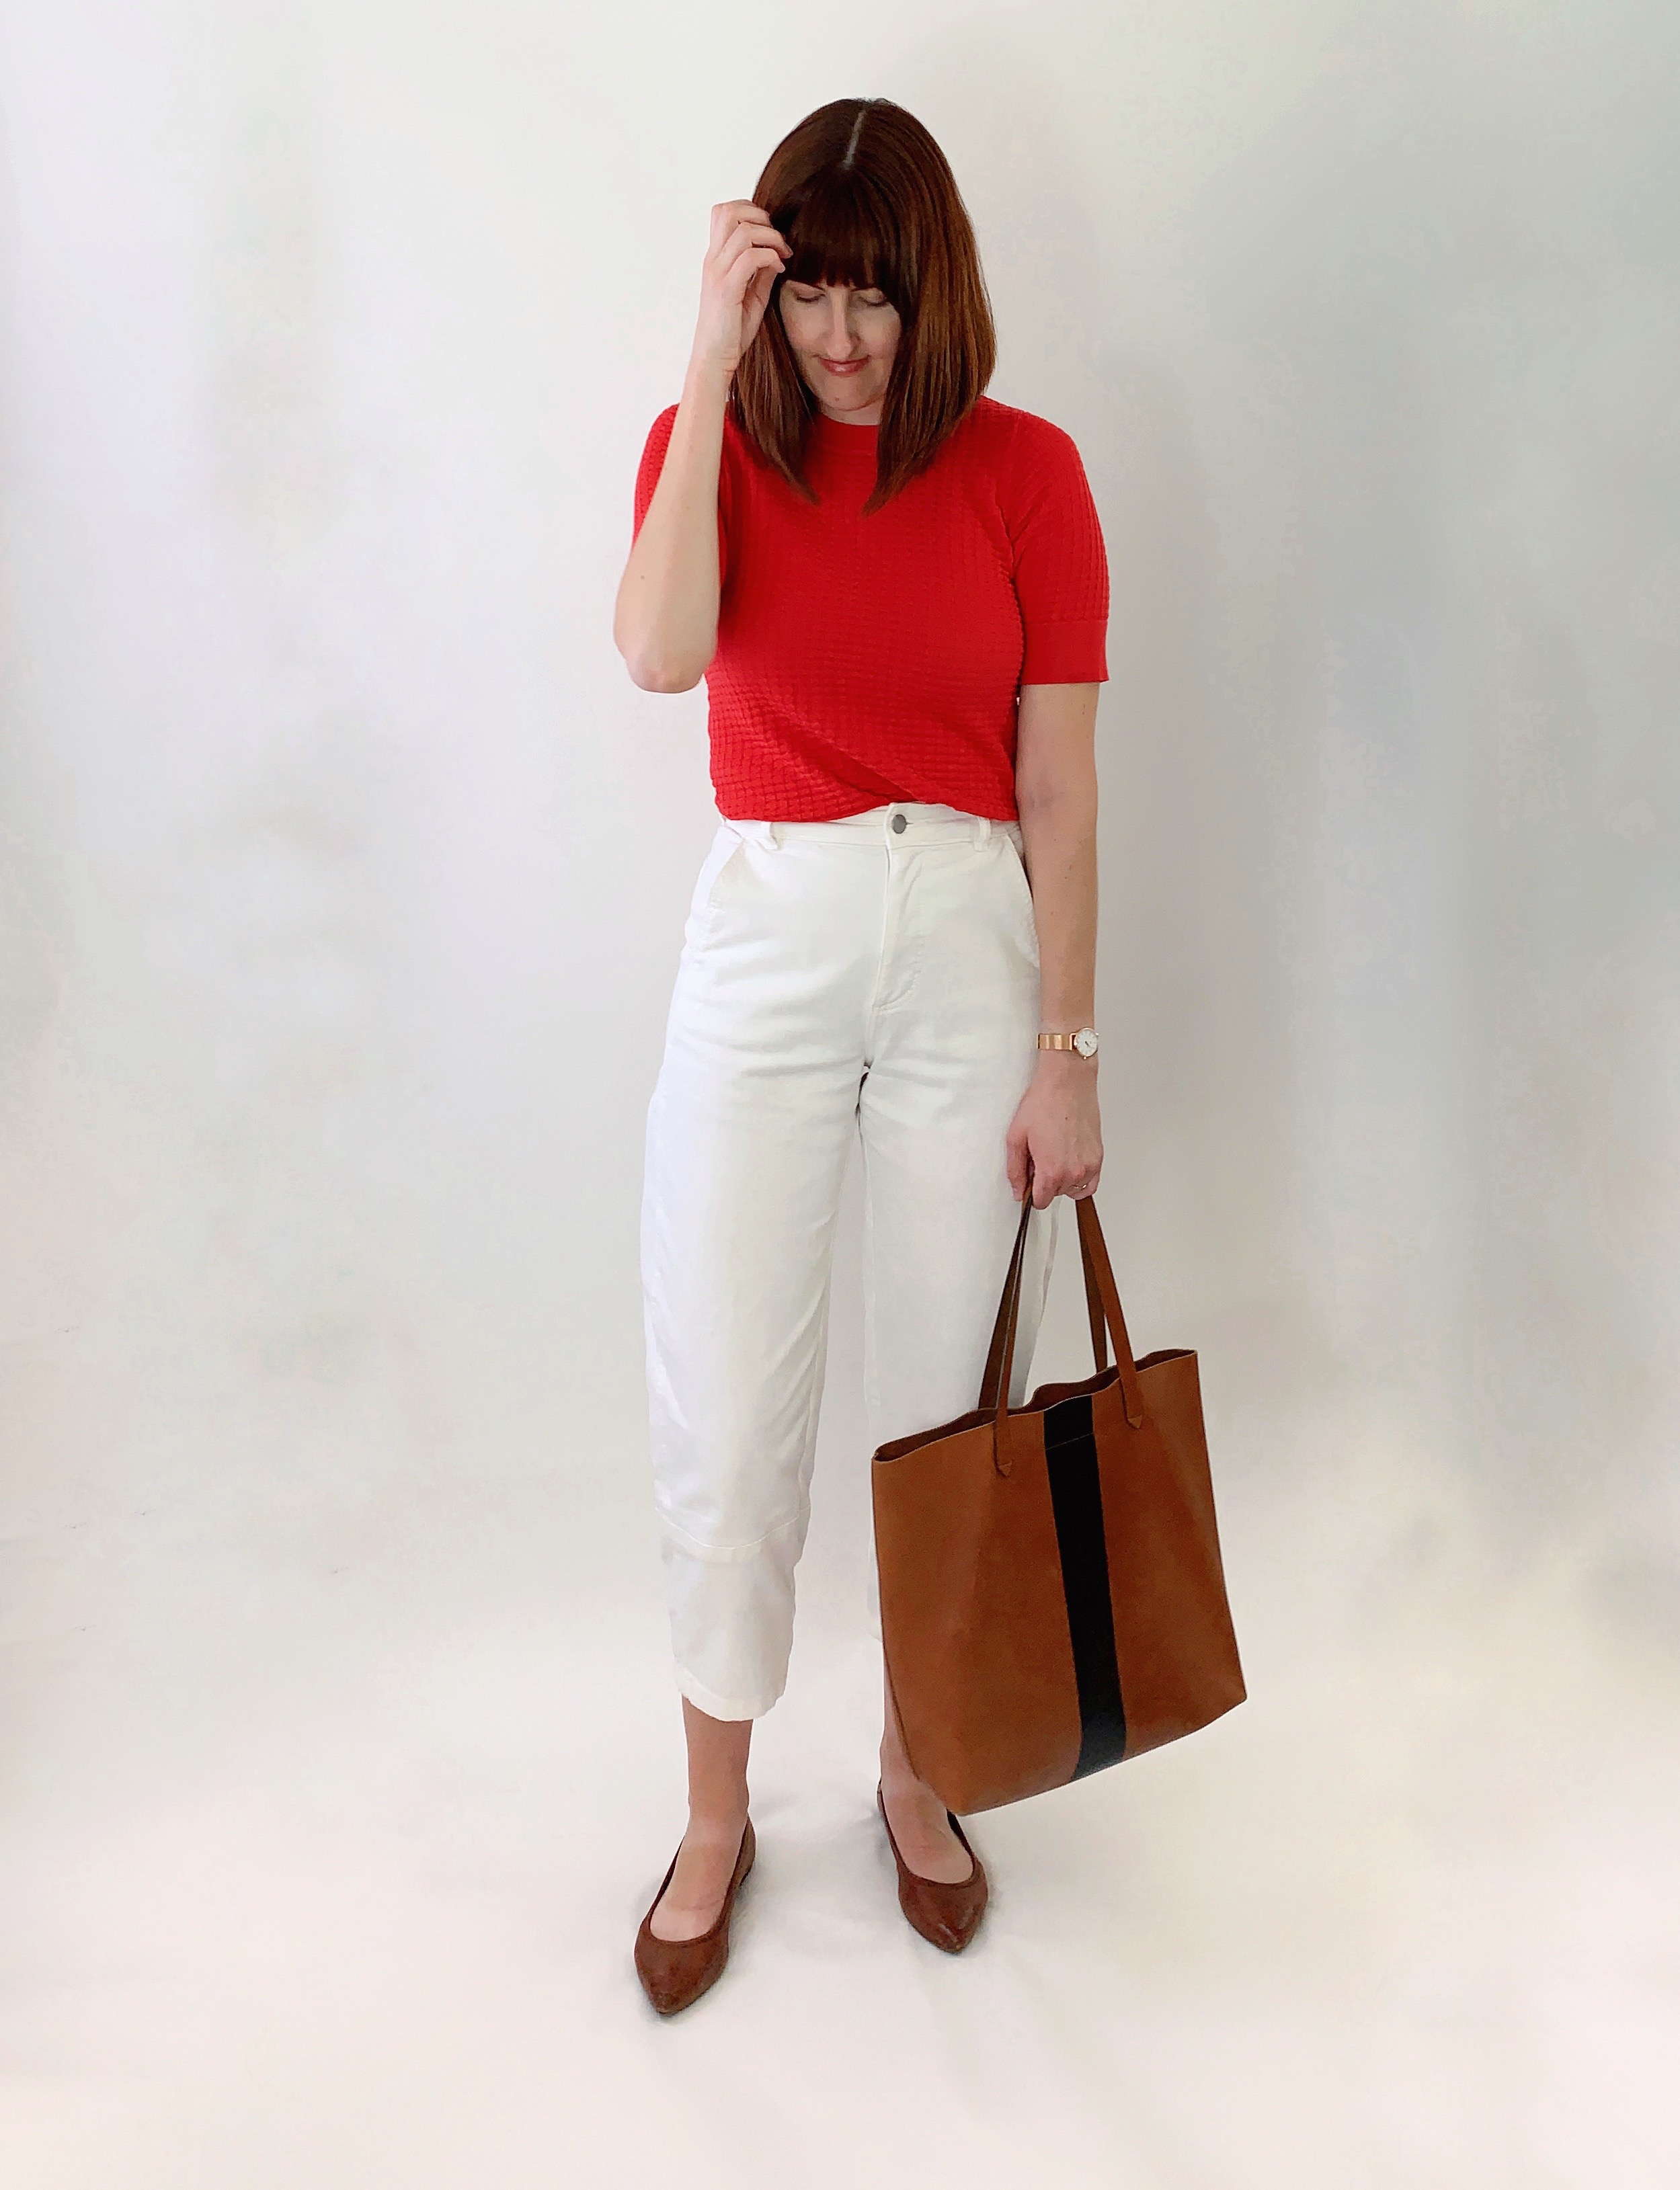 White Pants for The Office, Connecticut Fashion and Lifestyle Blog